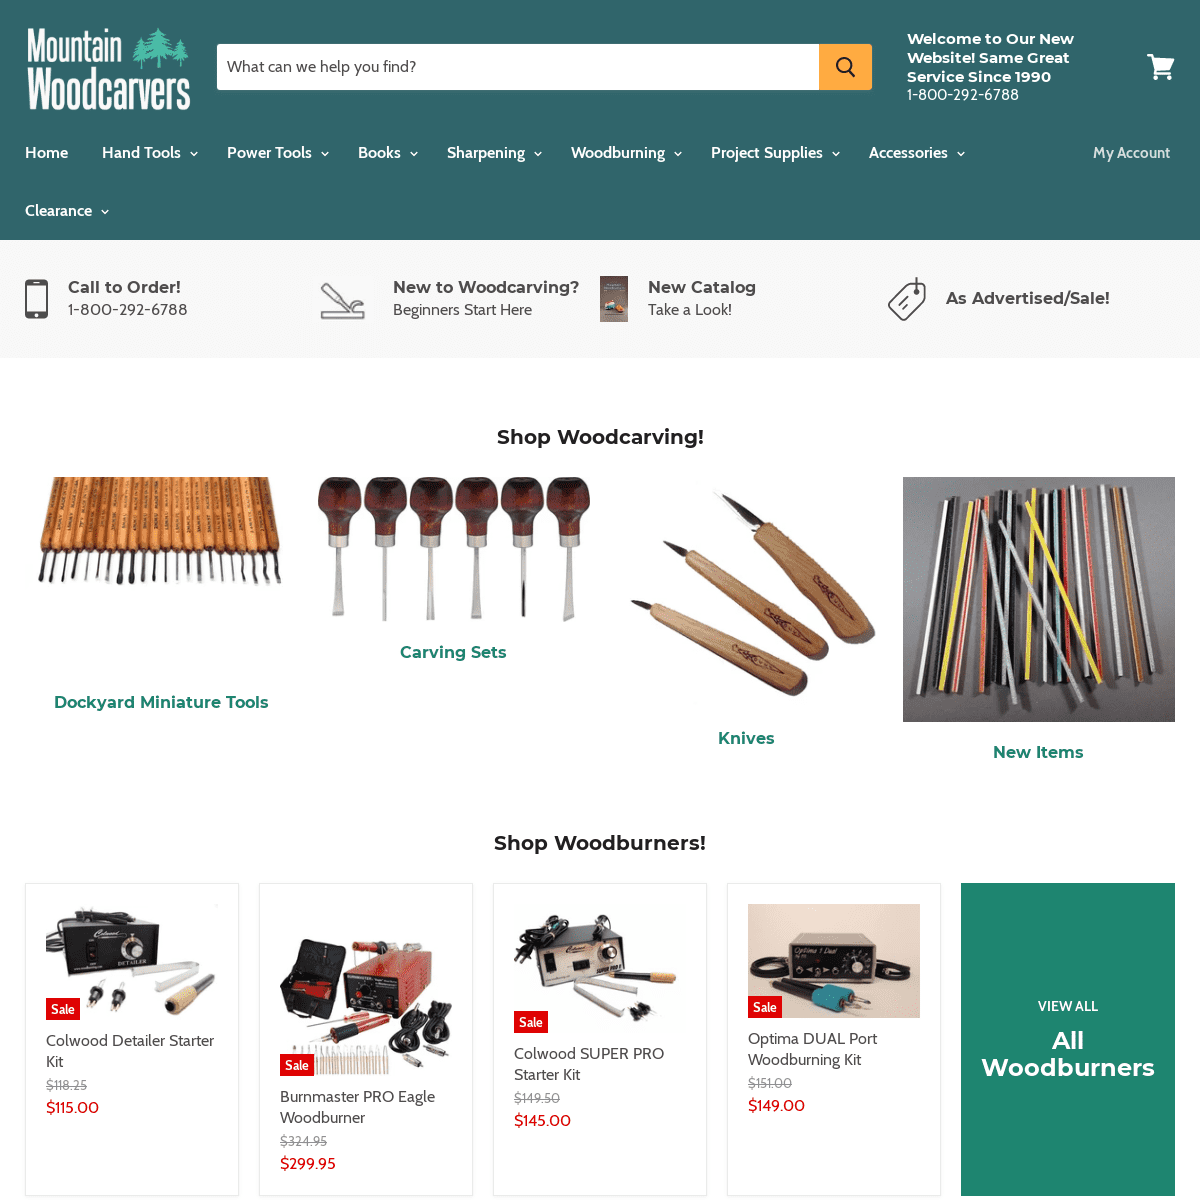 Mountain Woodcarvers - Tools & Supplies for Wood Carving & Woodburning